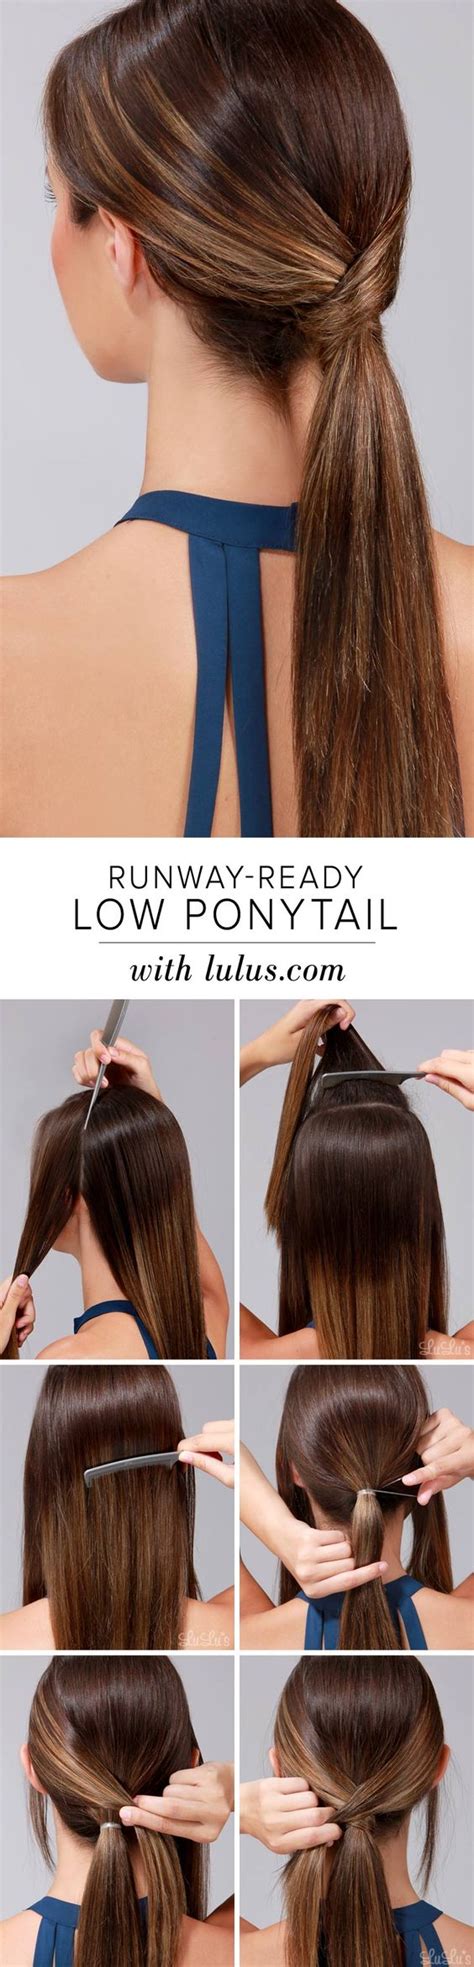 How to do a lazy ponytail?